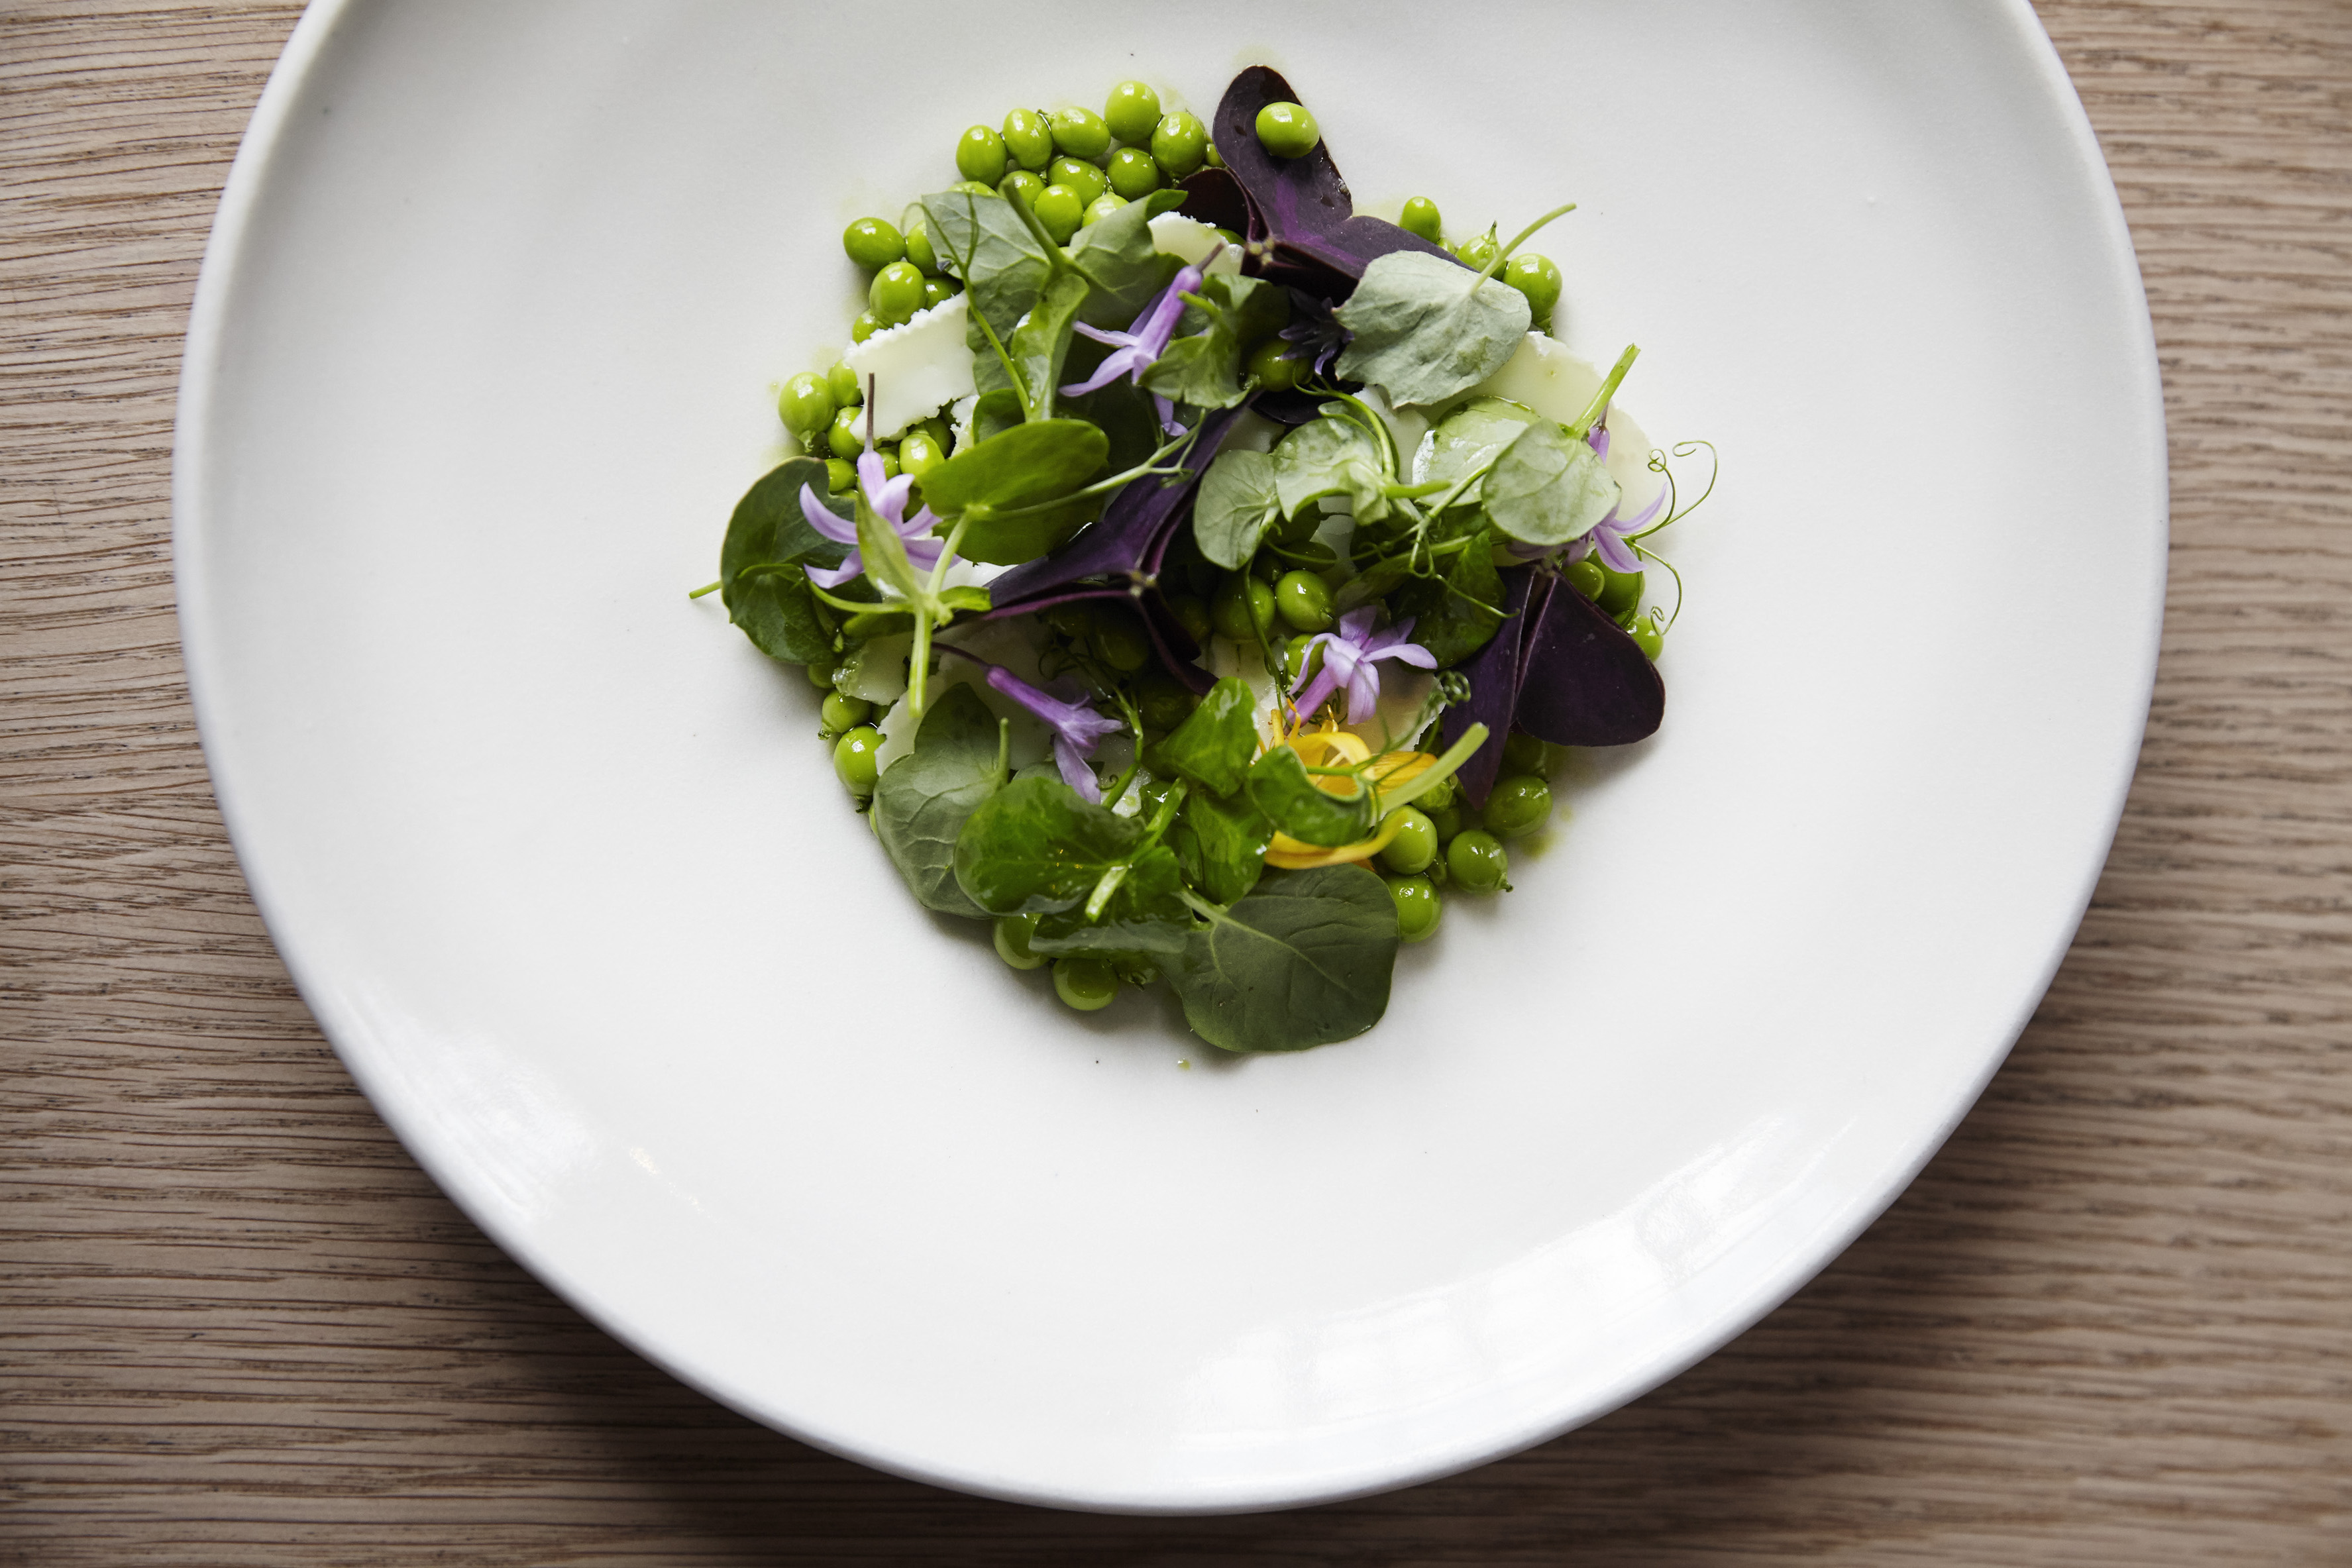 A plate of peas and pea shoots.